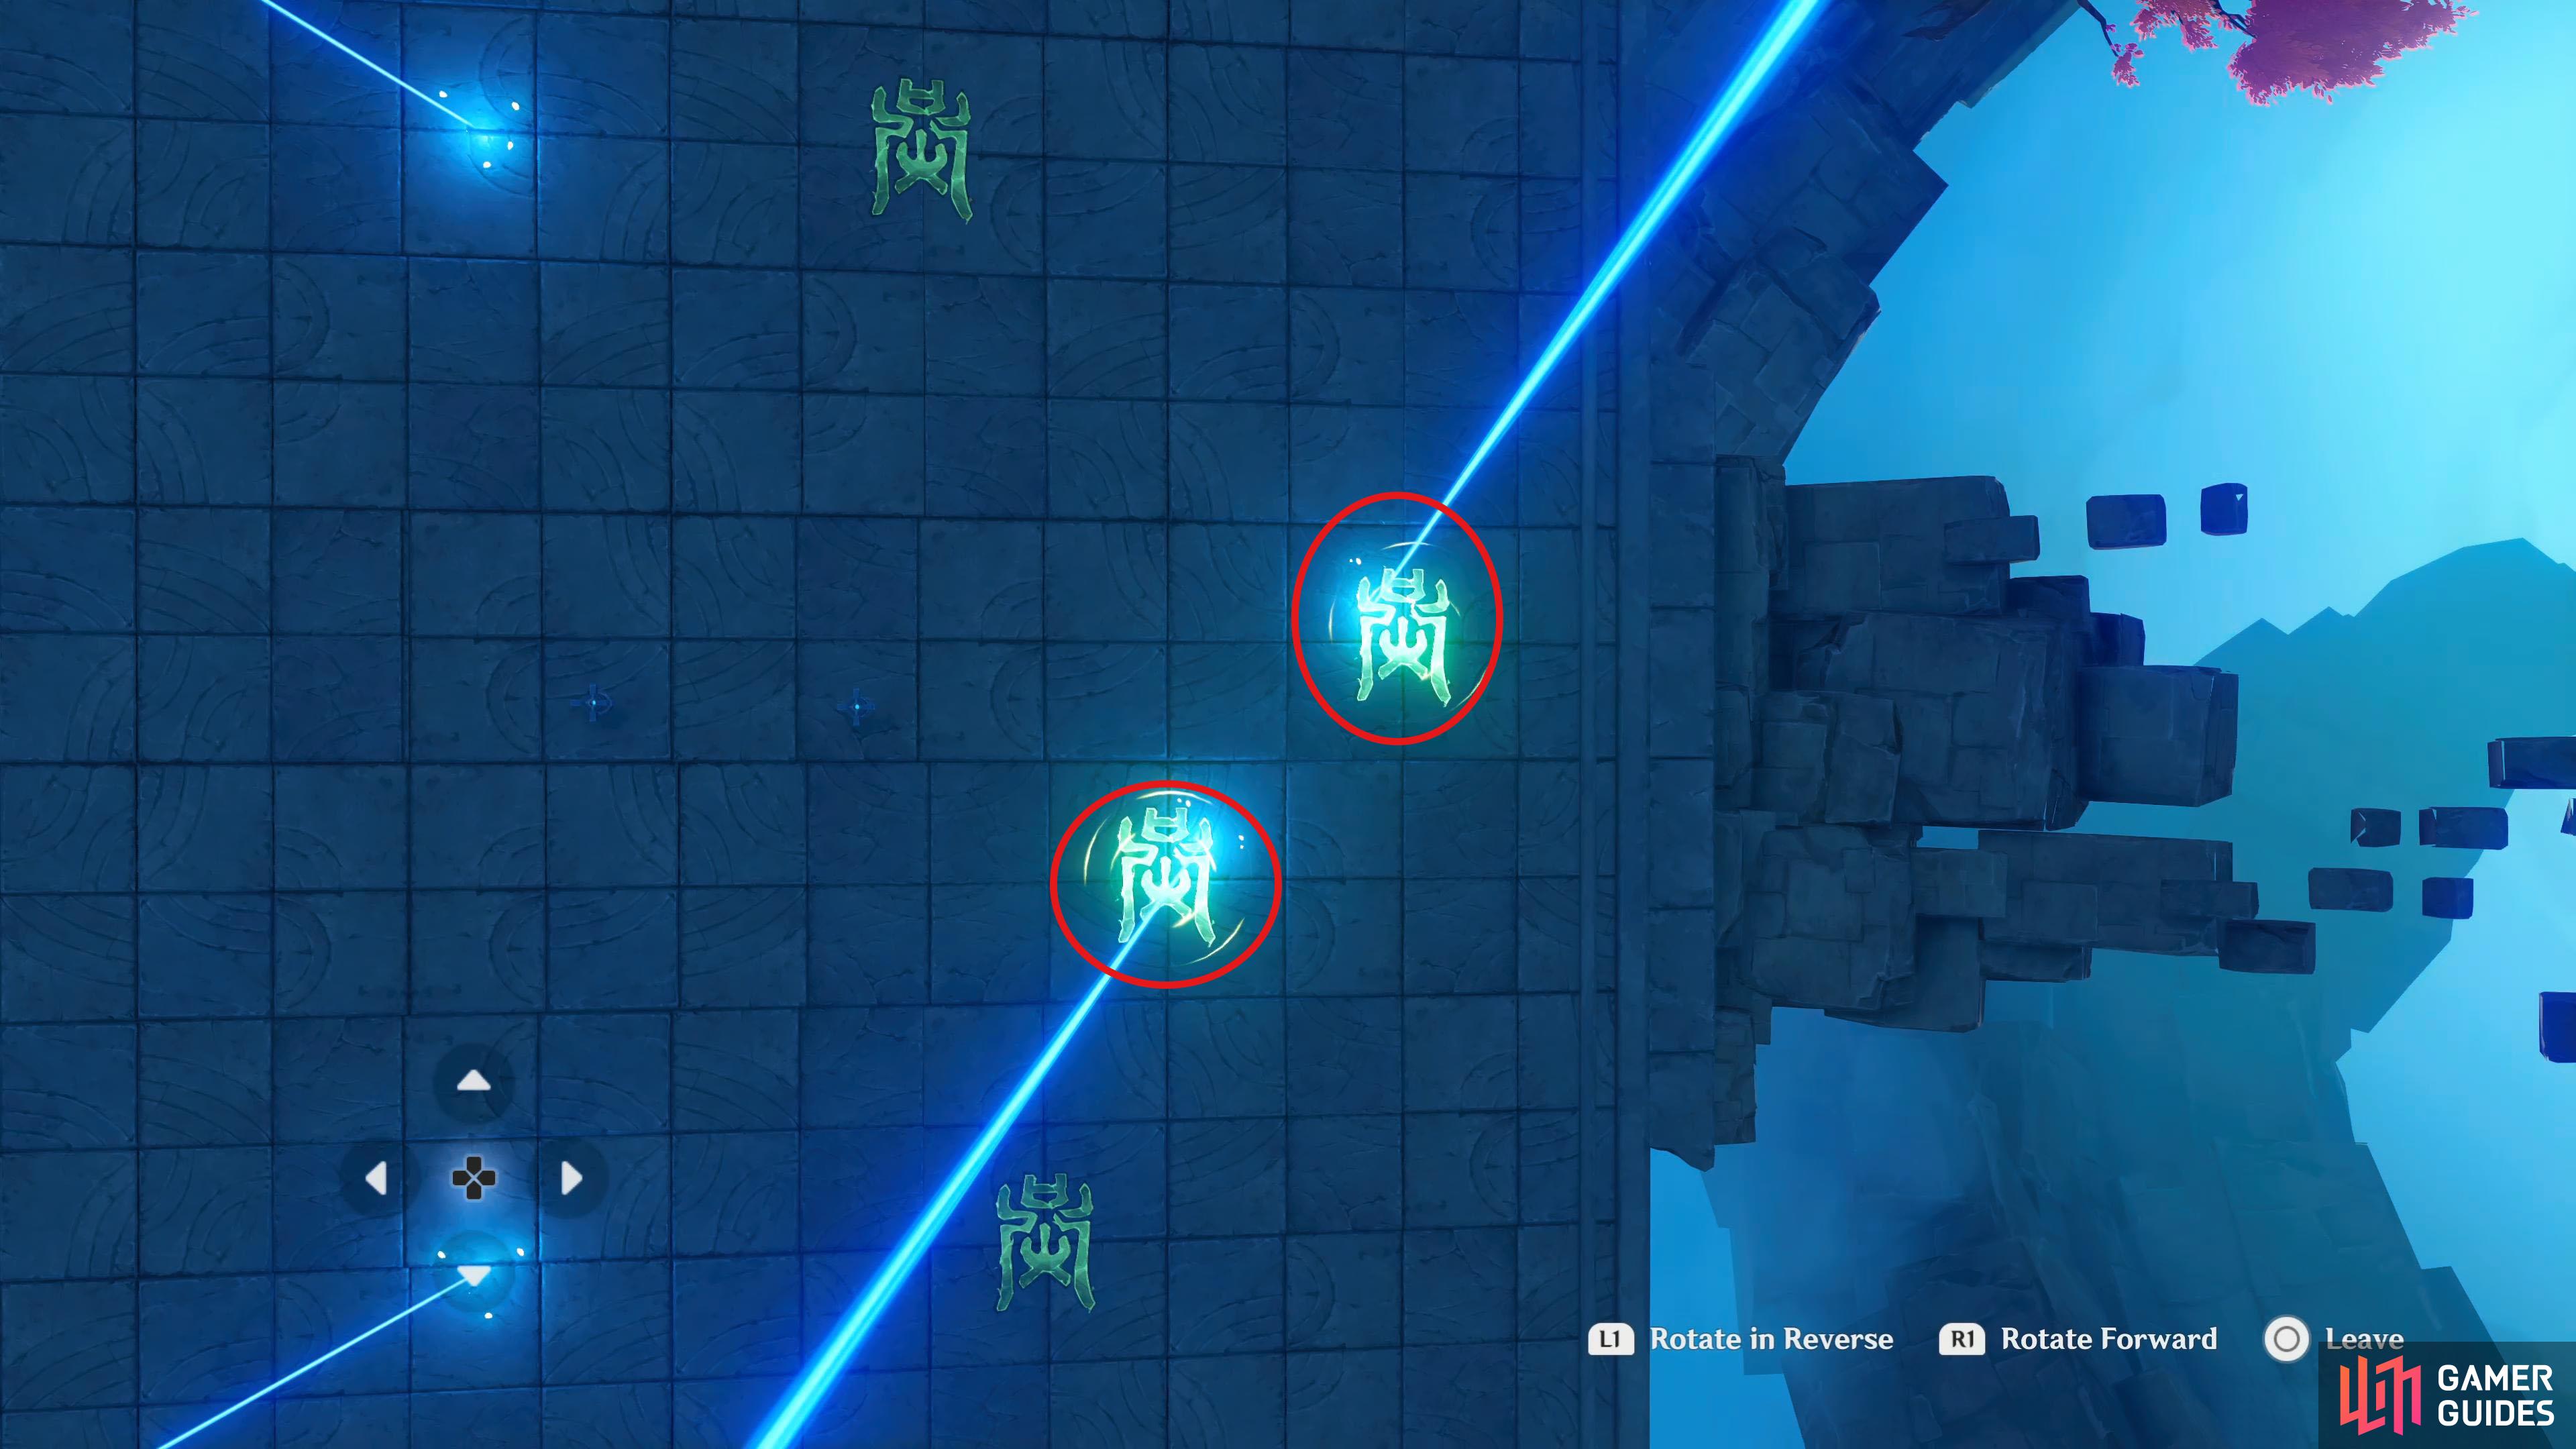 The Lightshaper with the smaller gap between the beams needs to activate the runes on the east